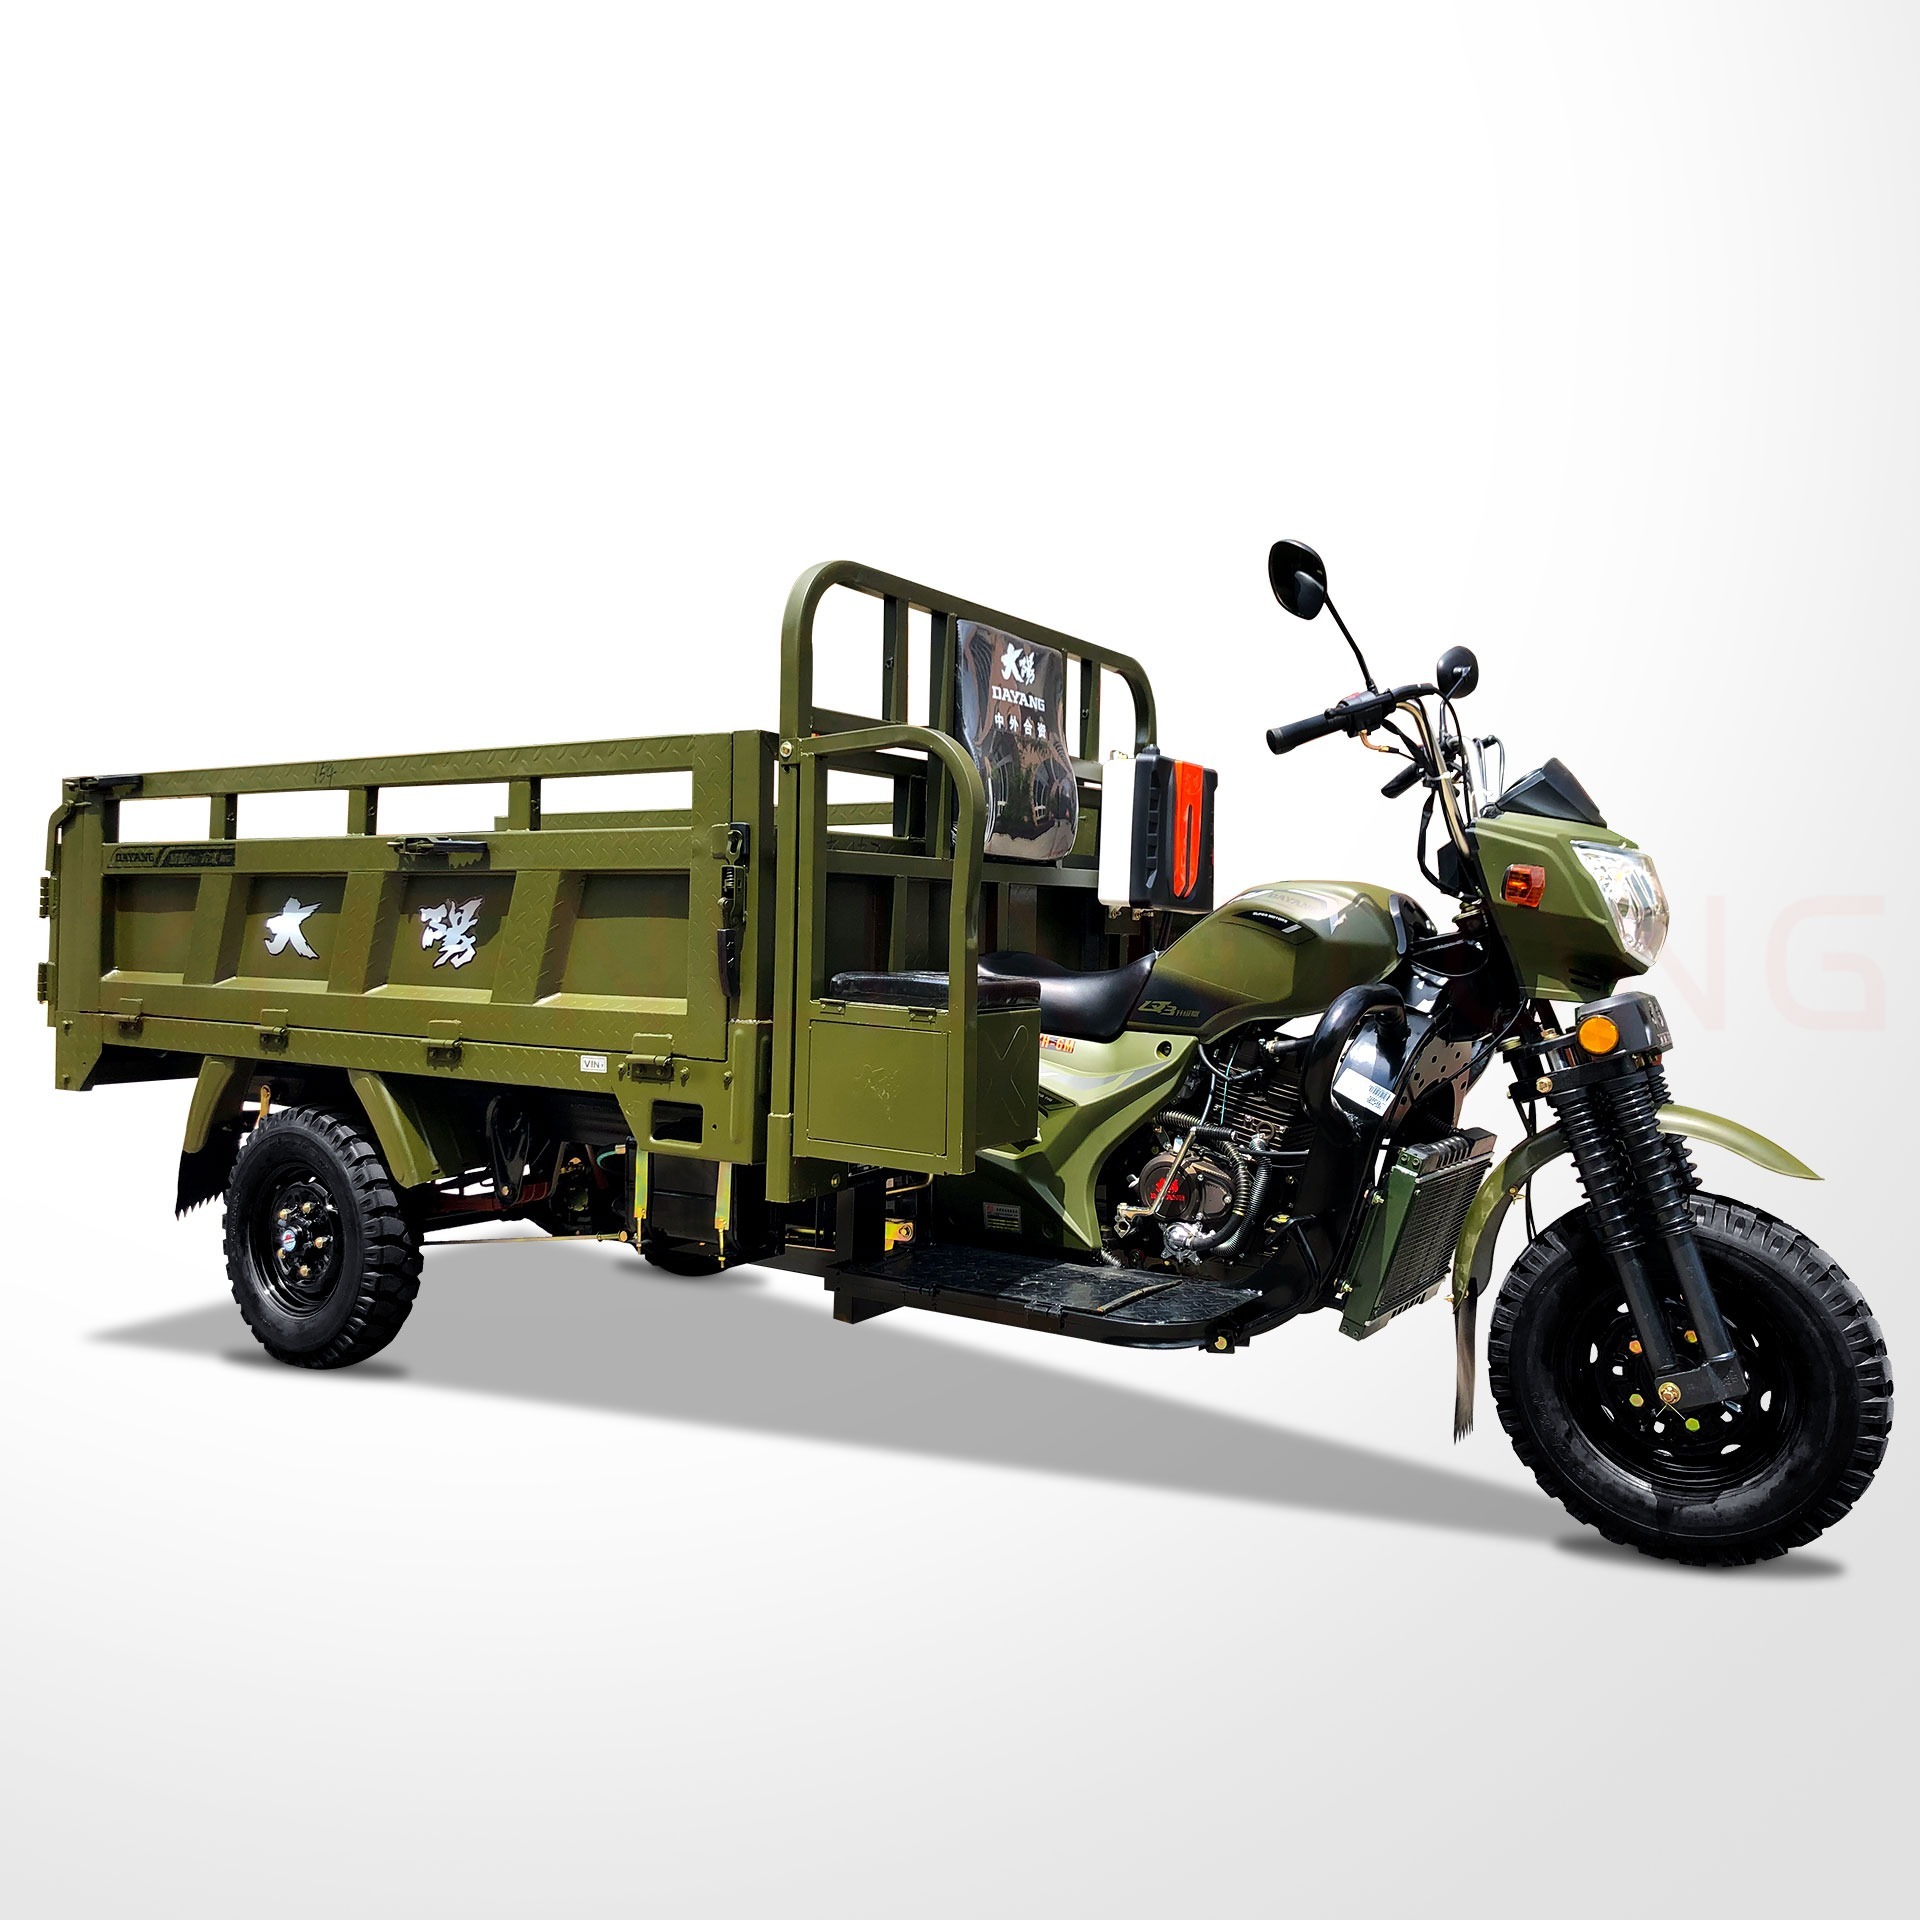 DY-WB1 350CC heavy loading cargo tricycle models with passenger seats